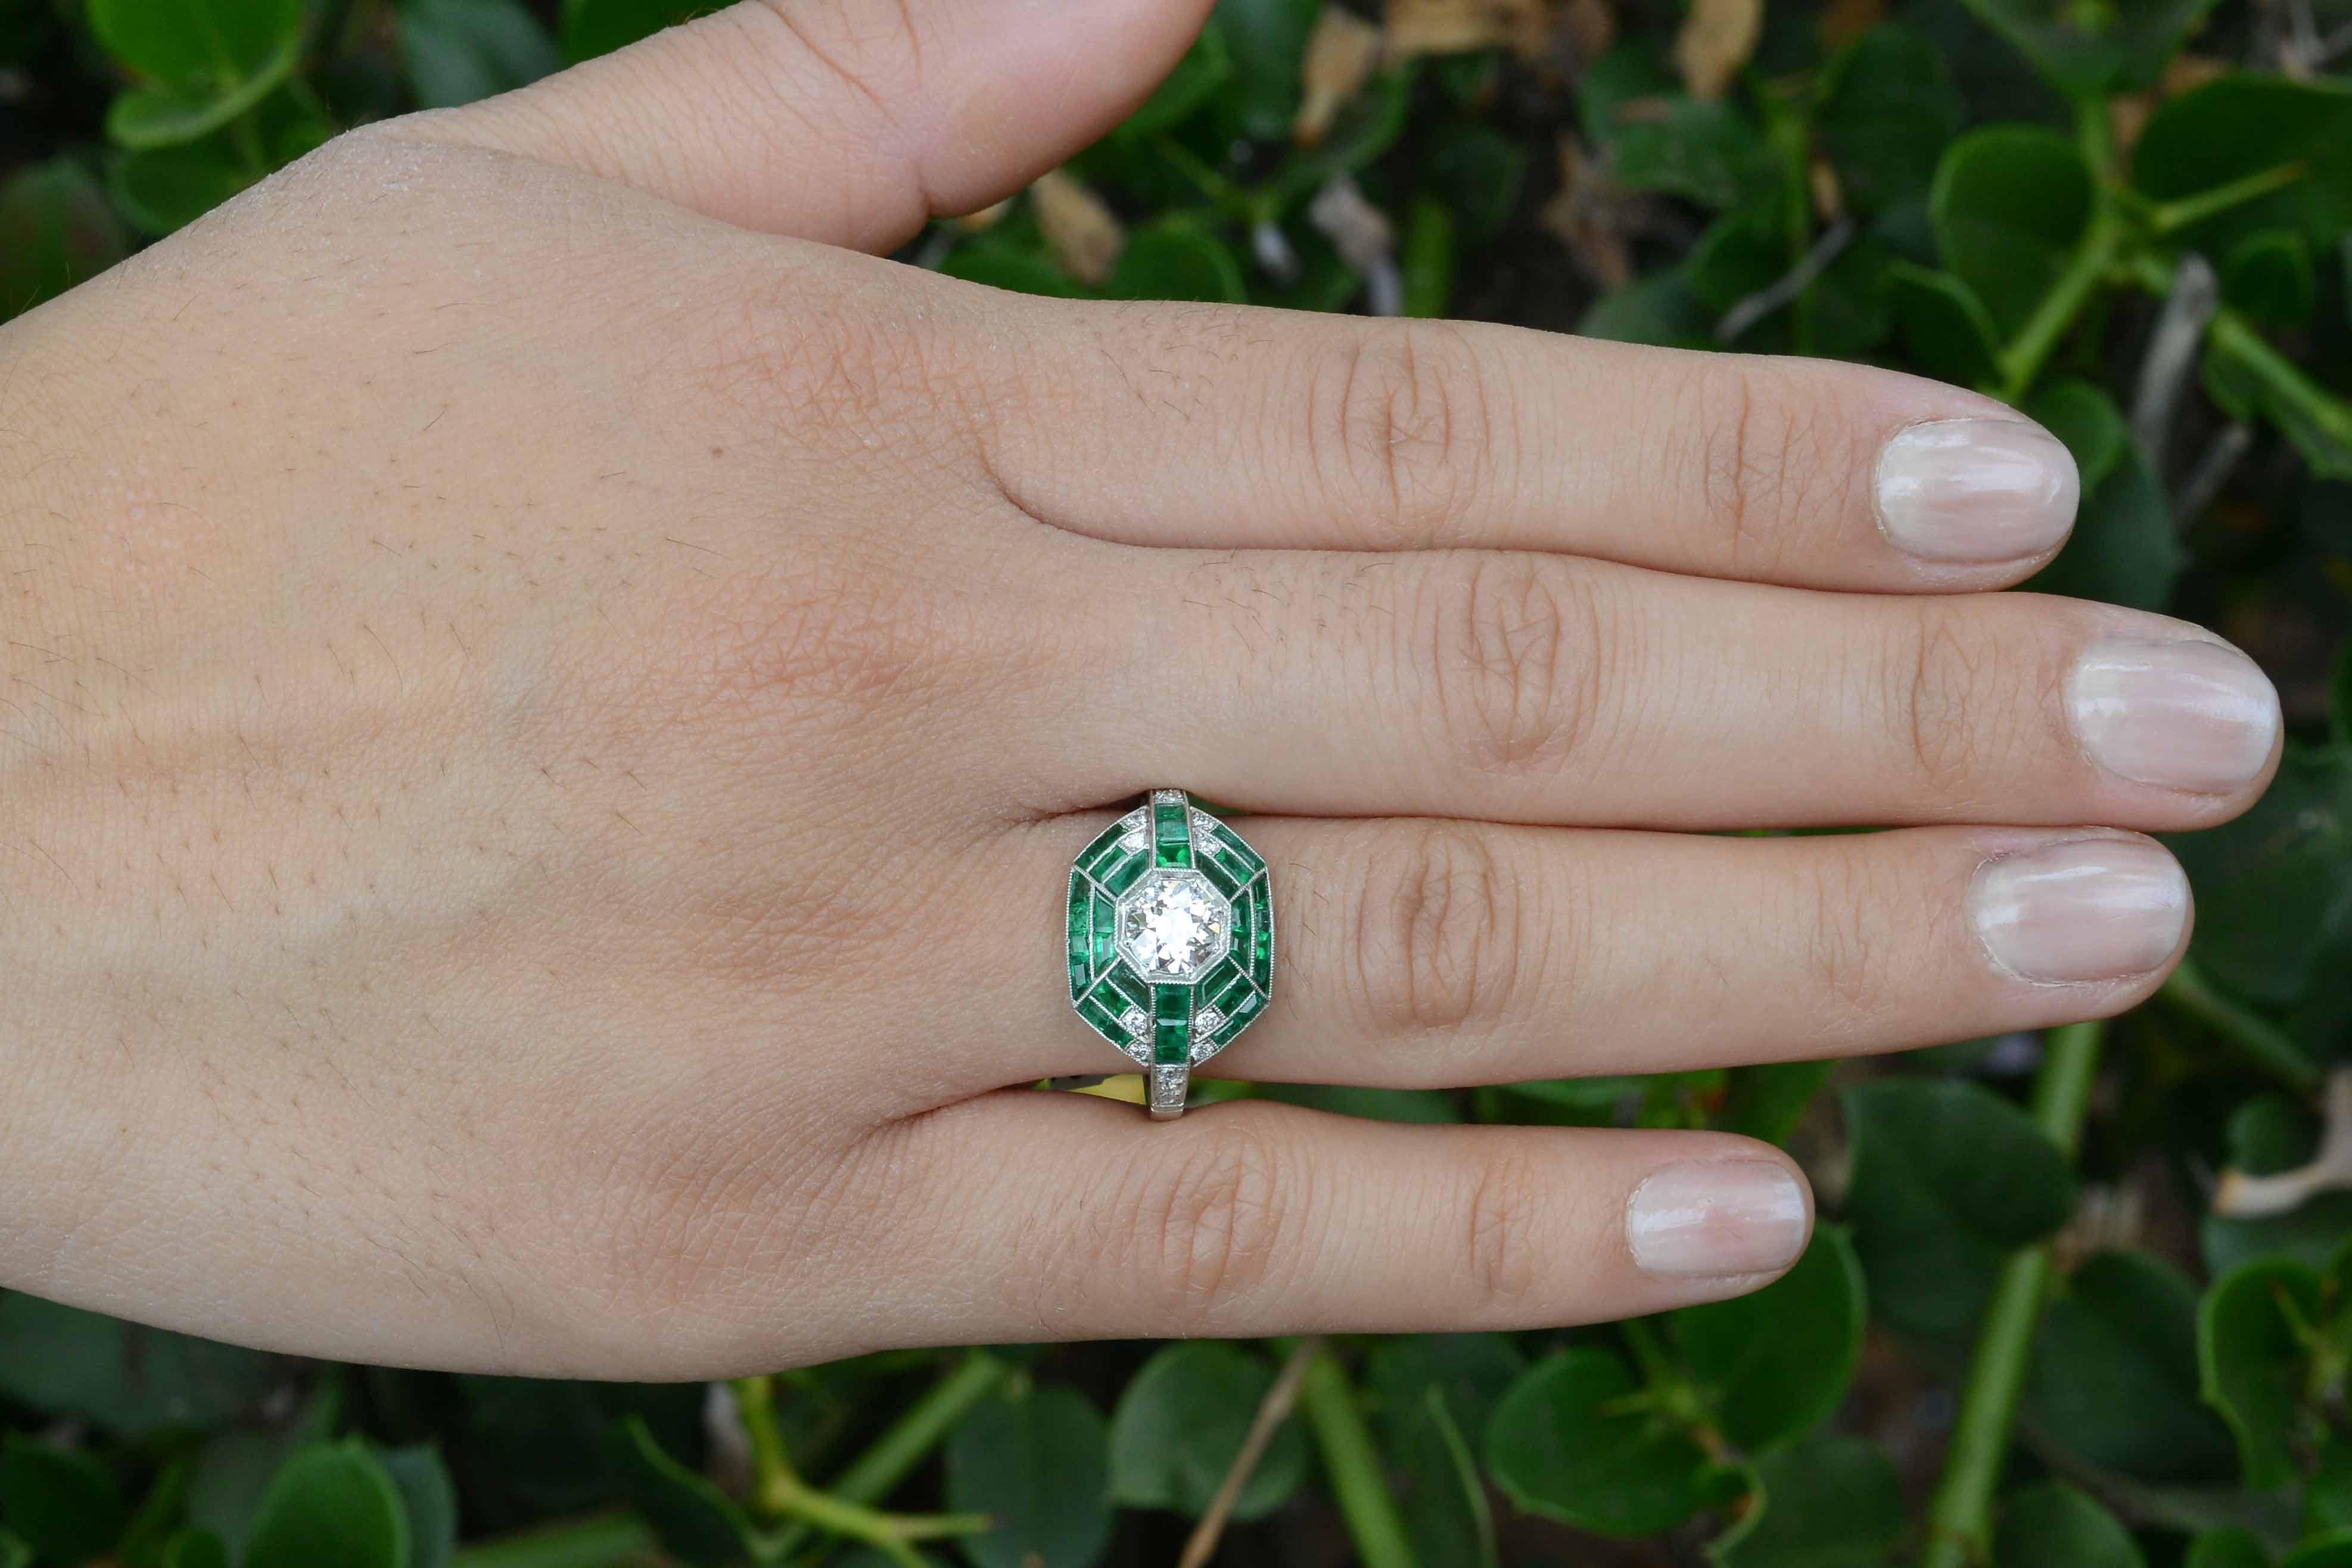 With a design inspired by the Art Deco era, a master jeweler revived this antique diamond and emerald masterpiece from the band on up to it's current glory. Centering on a fiery, old European brilliant weighing 0.80 carat (graded as H color VS1